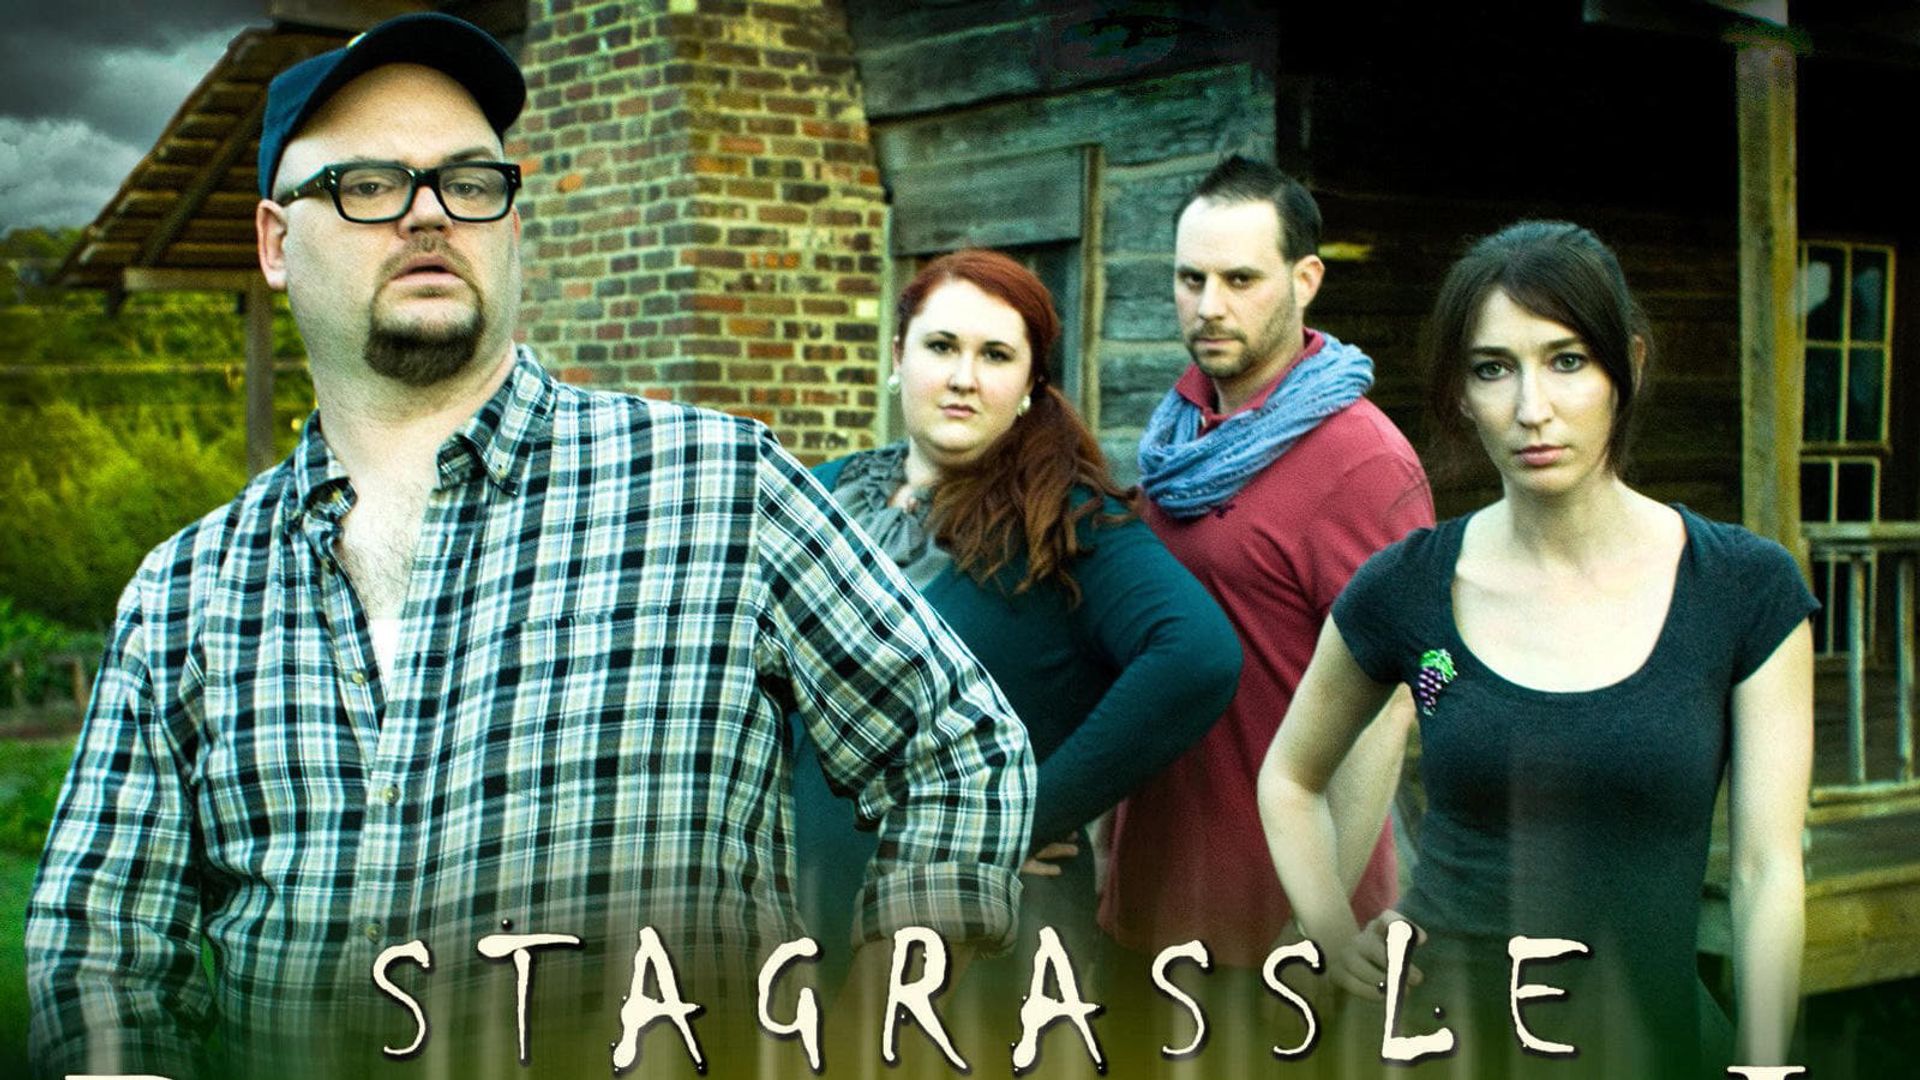 Stagrassle Paranormal background